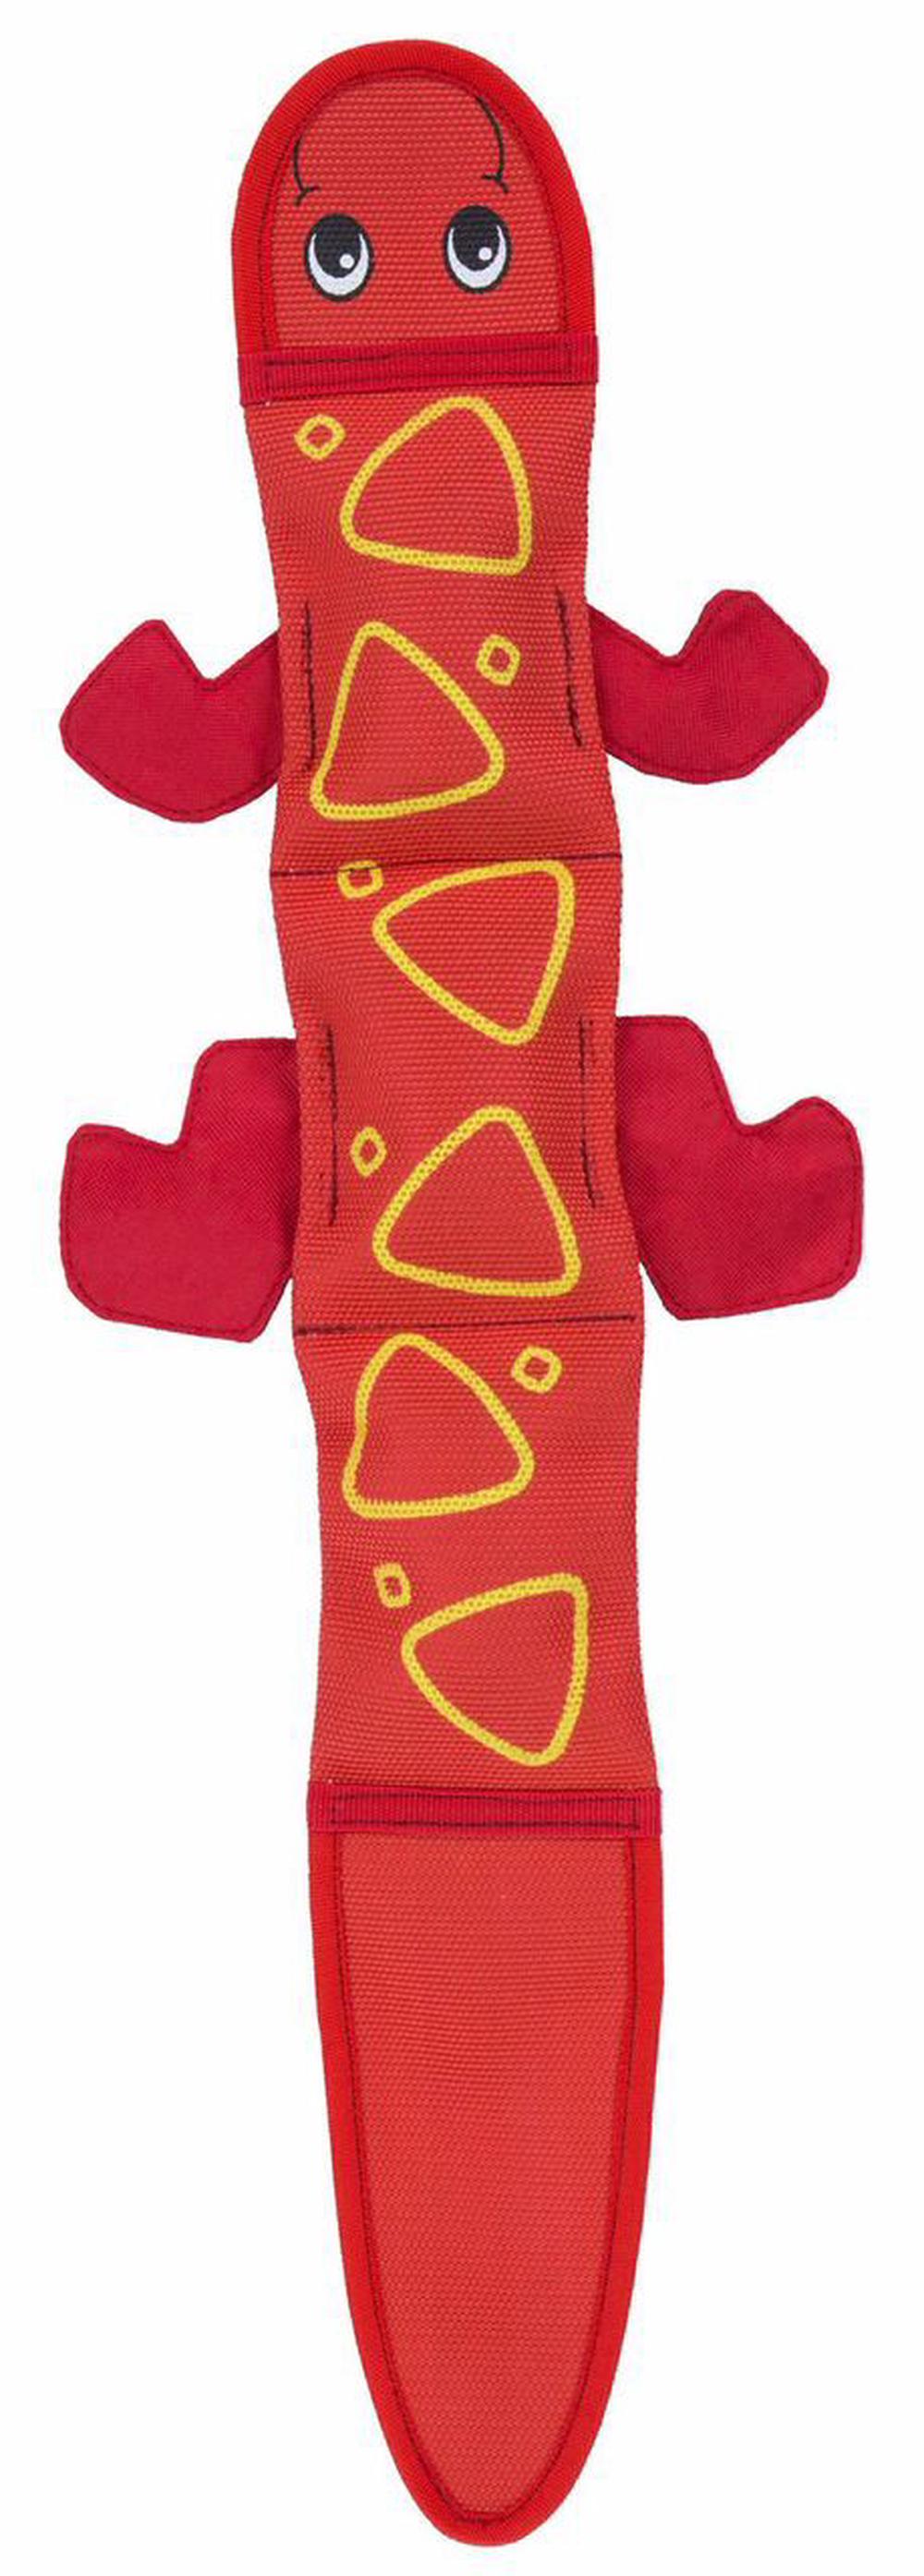 Fire Biterz Durable Tough Dog Toy Made